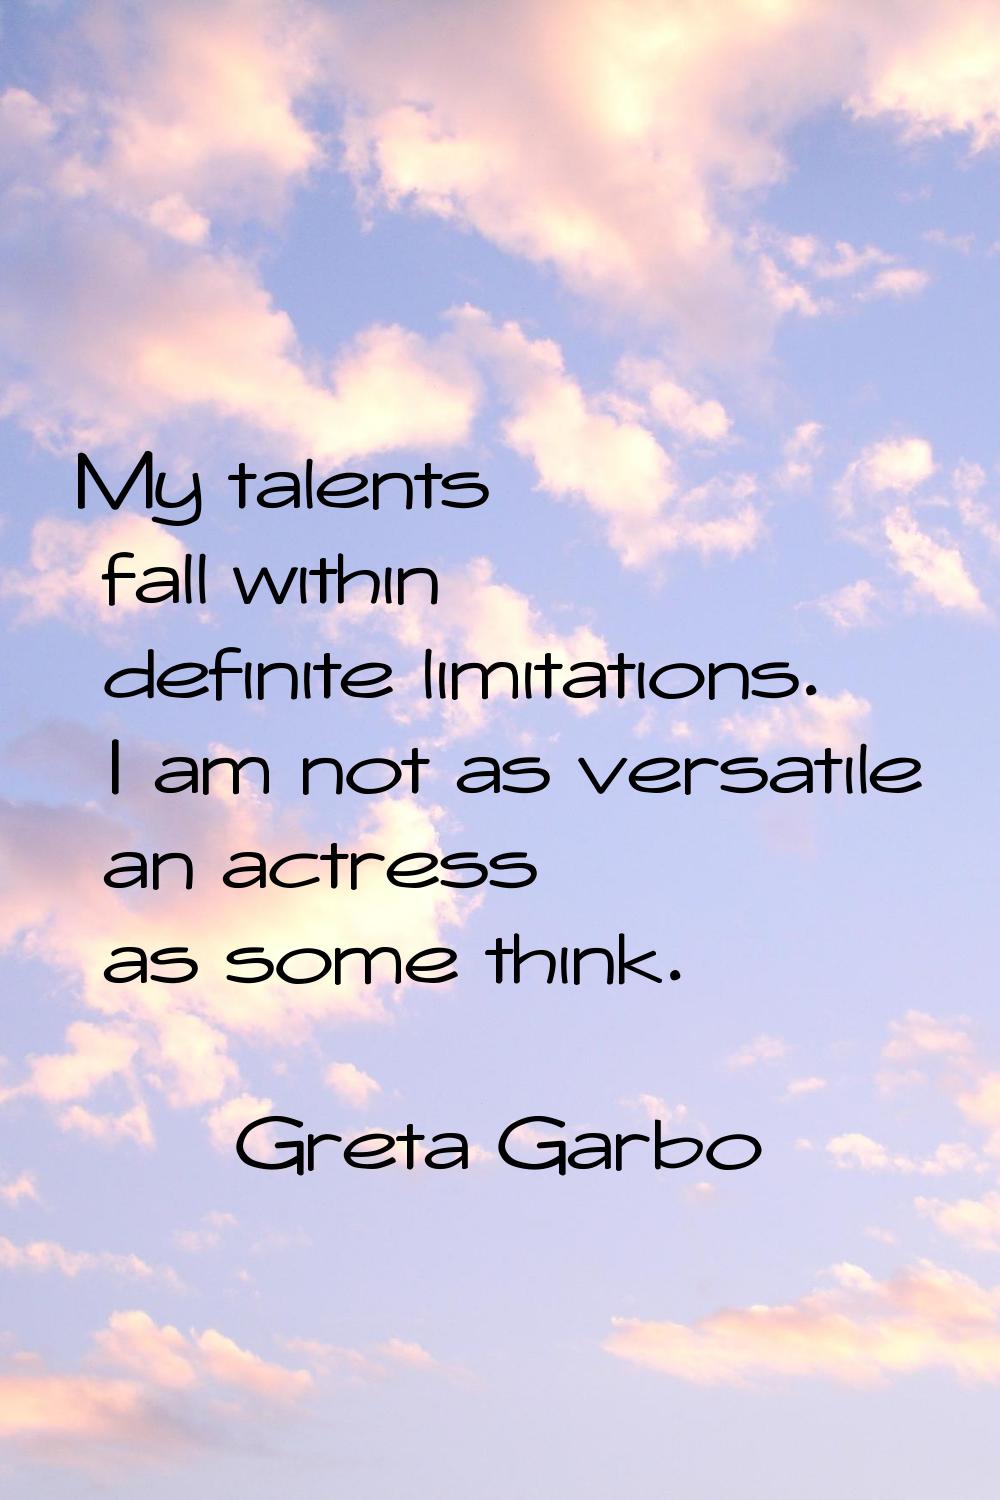 My talents fall within definite limitations. I am not as versatile an actress as some think.